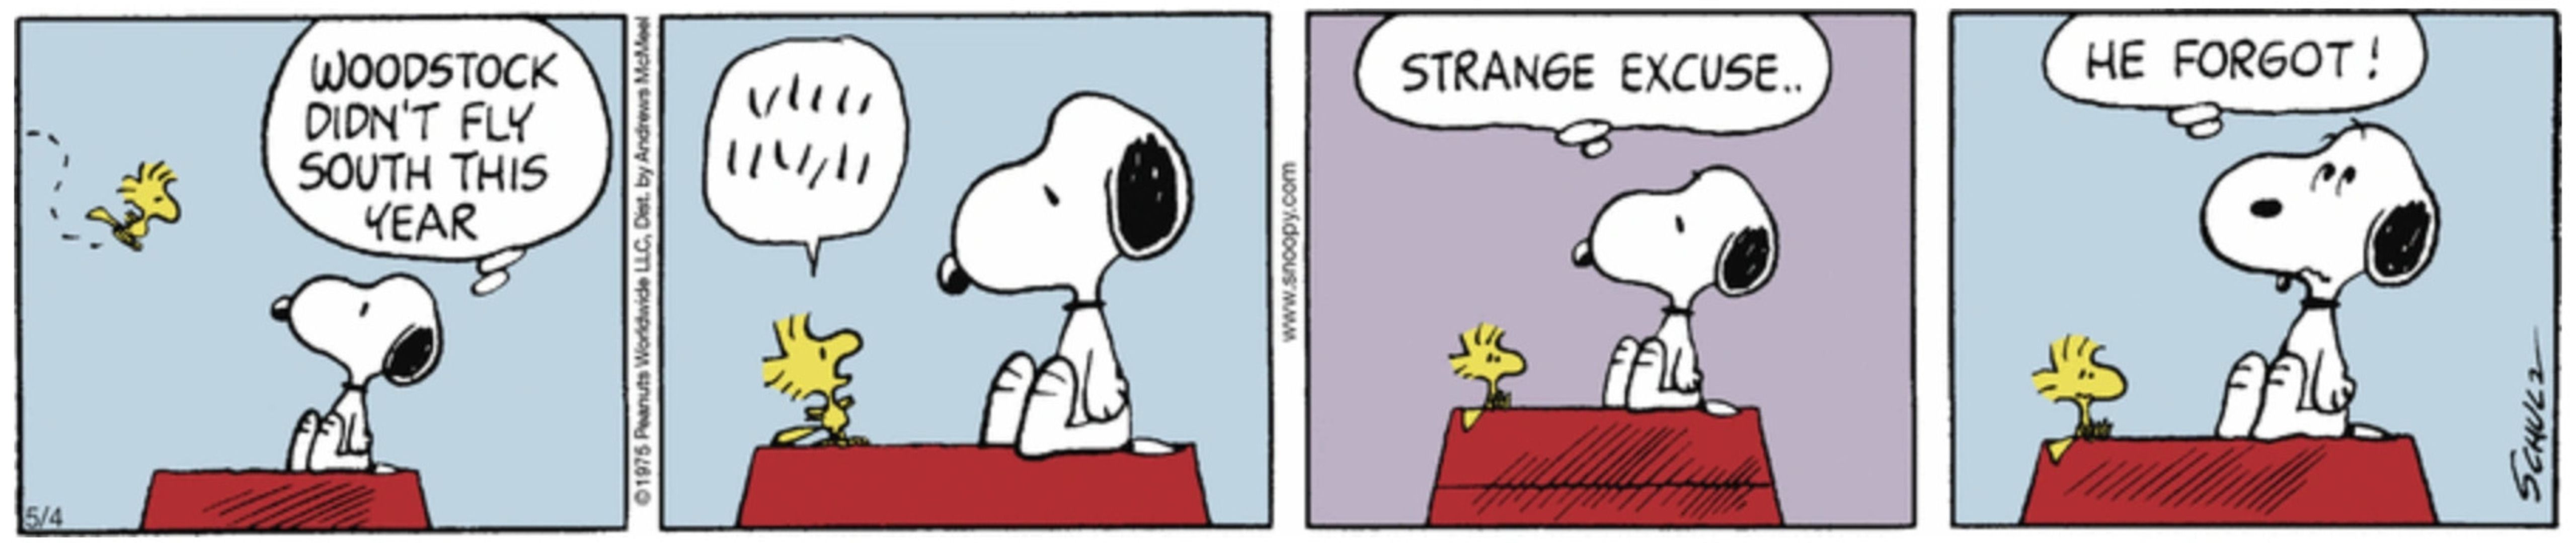 Woodstock explains that he forgot to fly south for the winter, which Snoopy calls a 